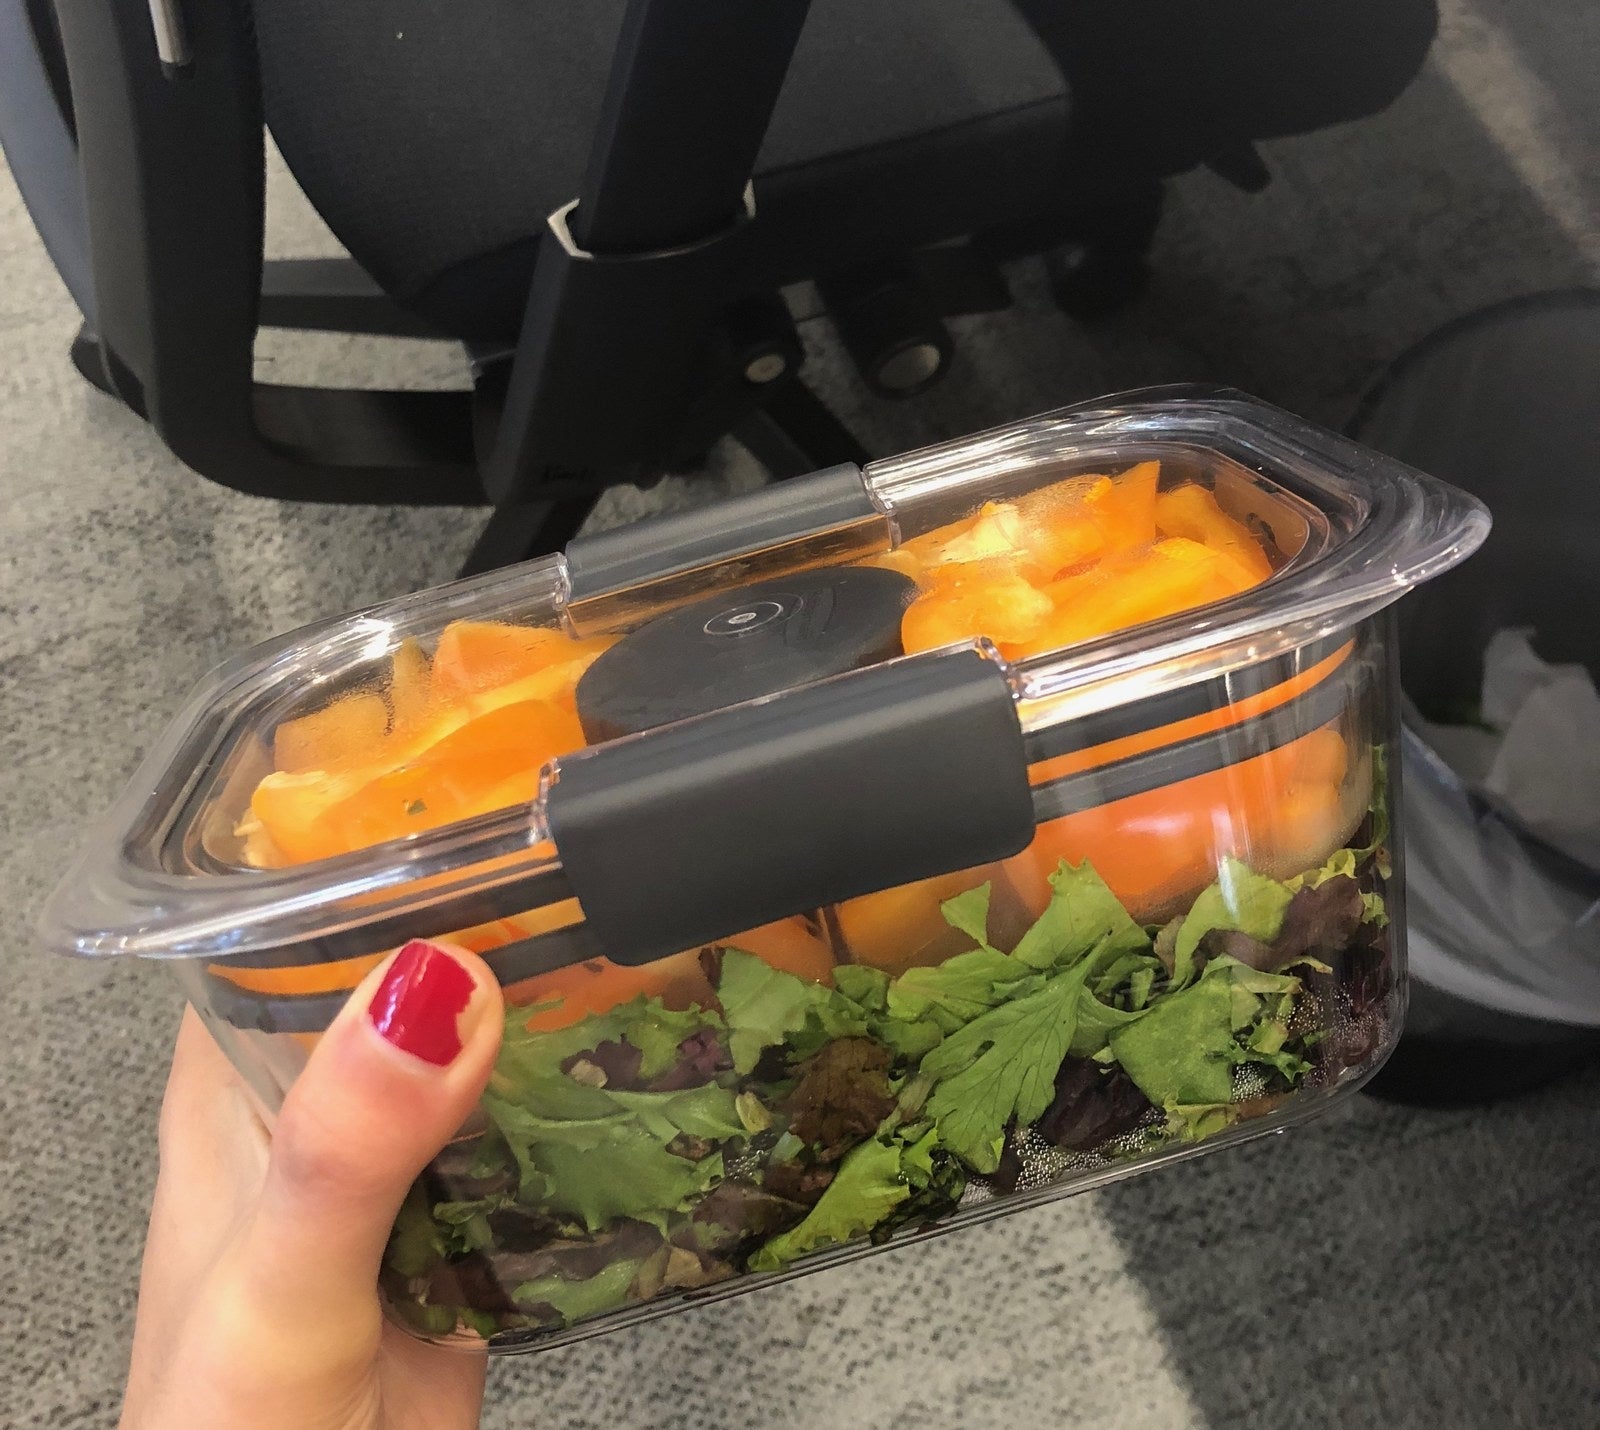 These Leak-Proof Plastic Containers Are Truly The Best For Packing